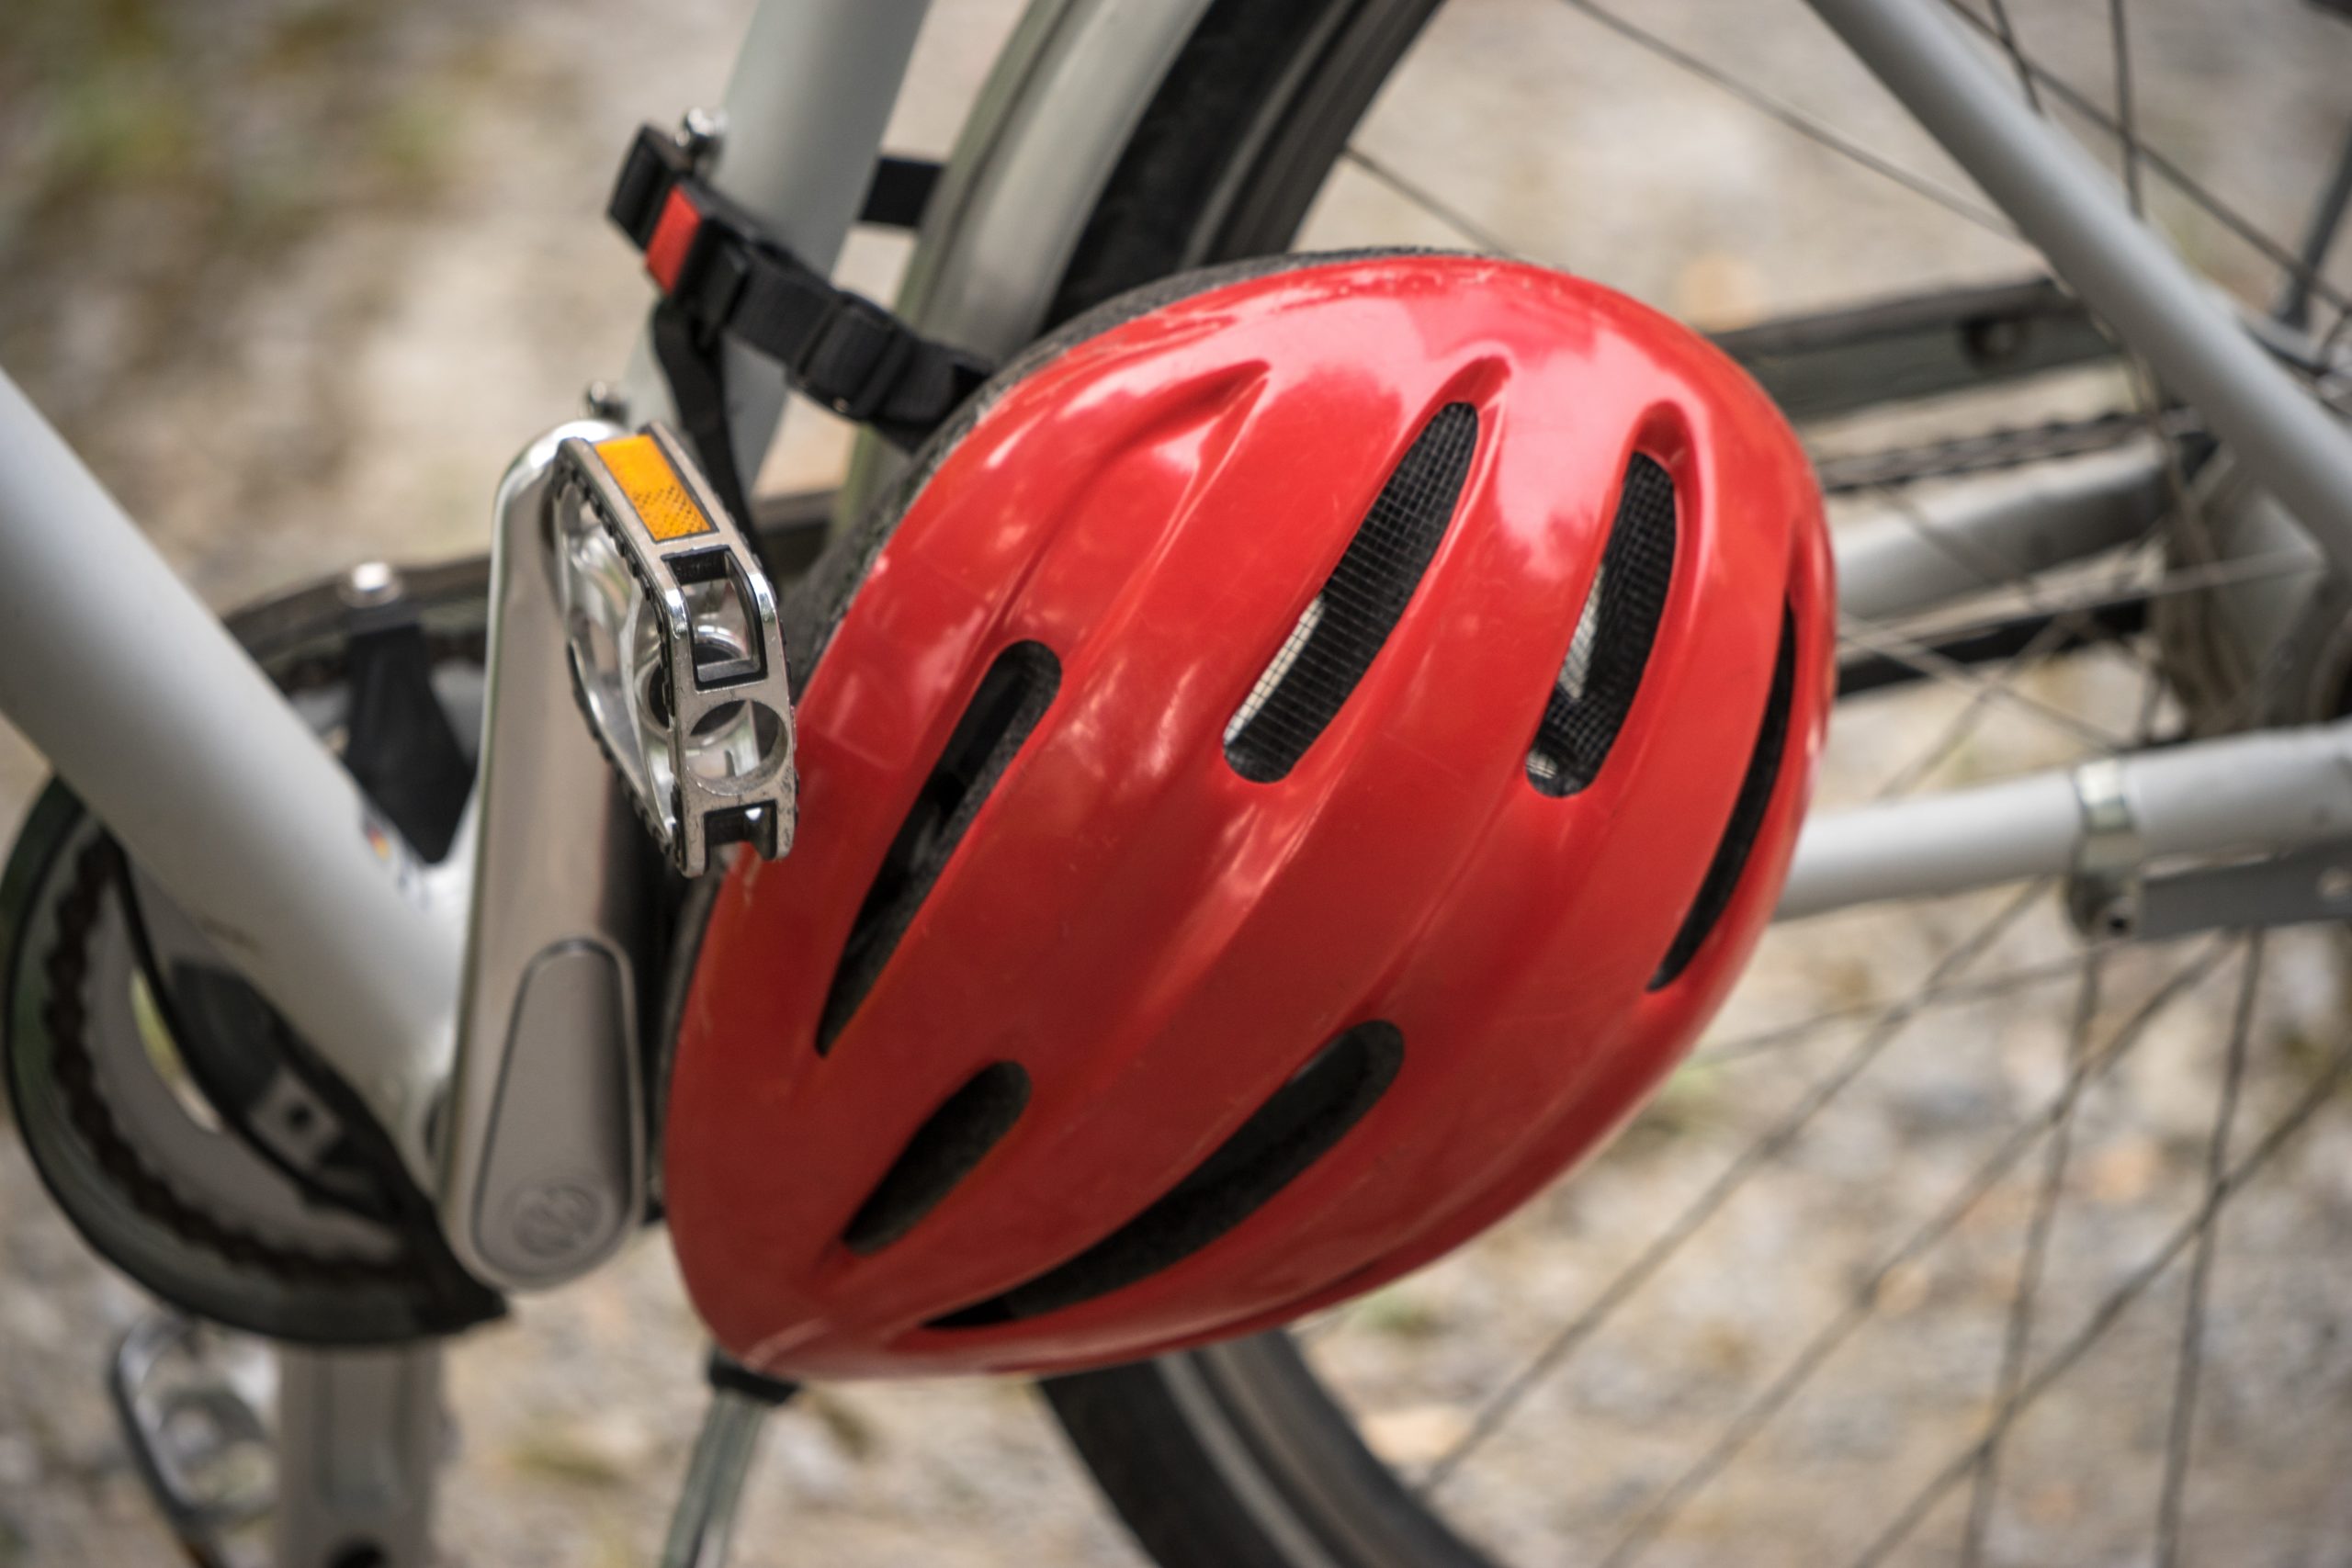 A close up of a red bicycle helmet